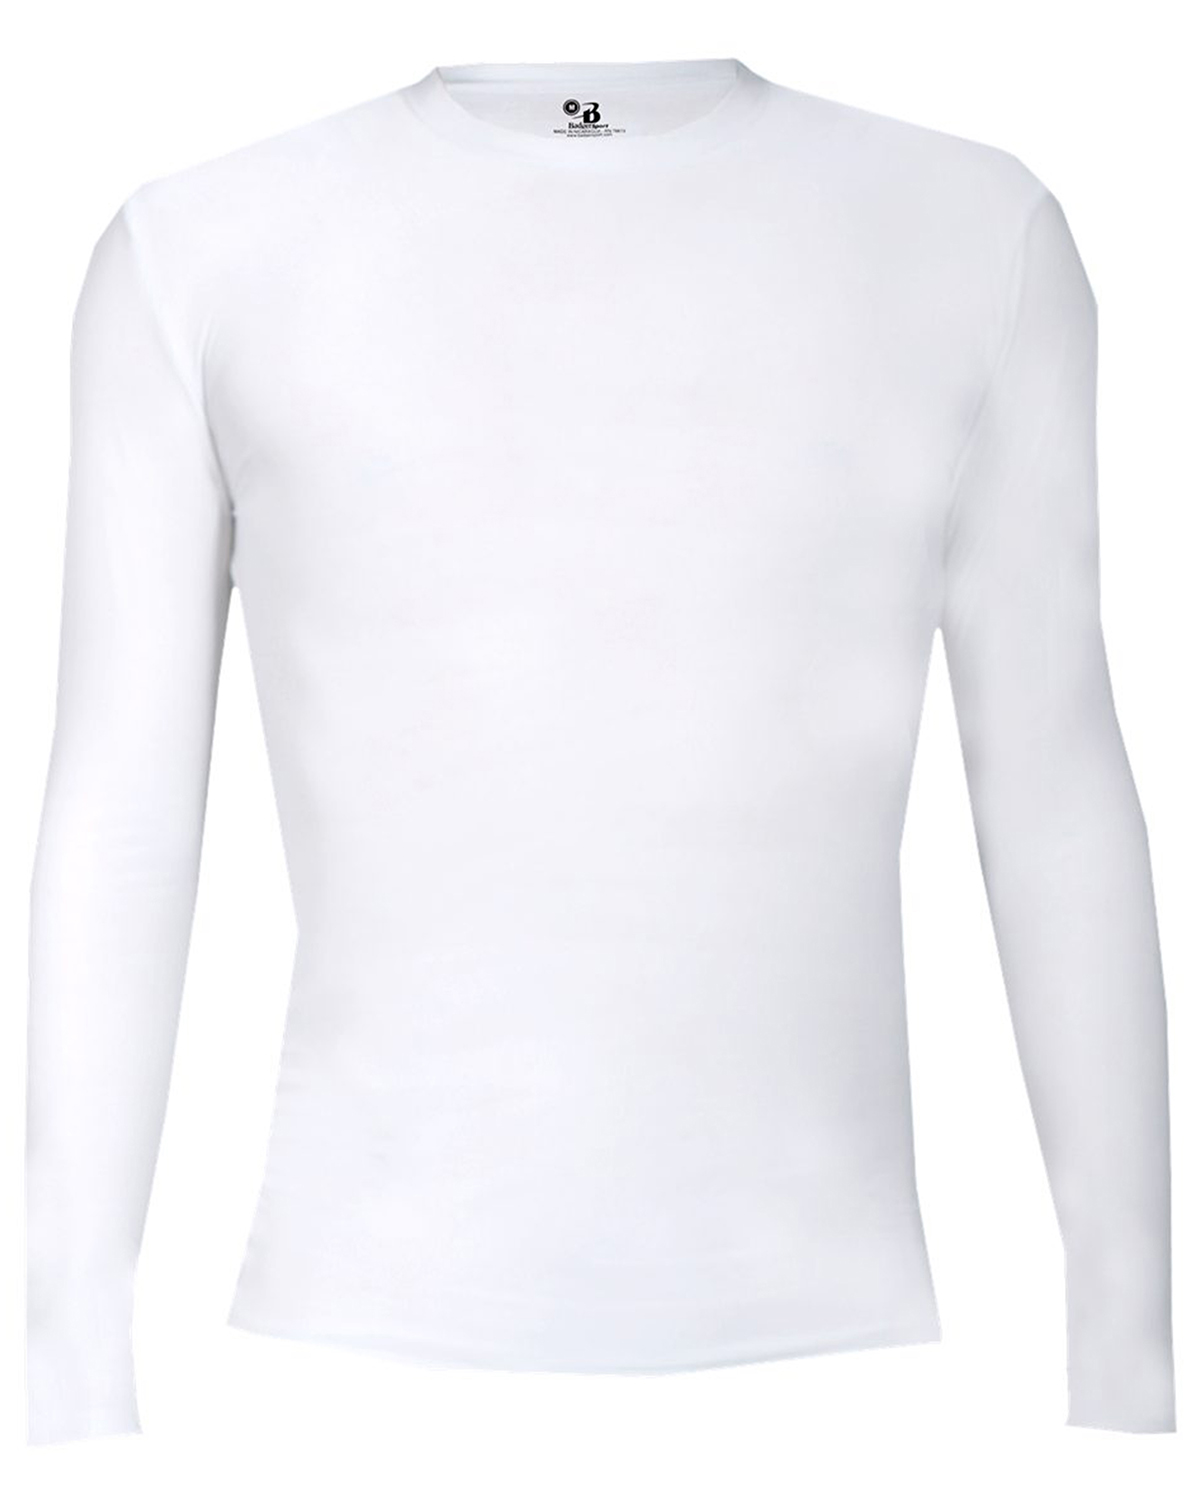 Badger Sport Sport B2605 - Youth Long-Sleeve Compression Tee